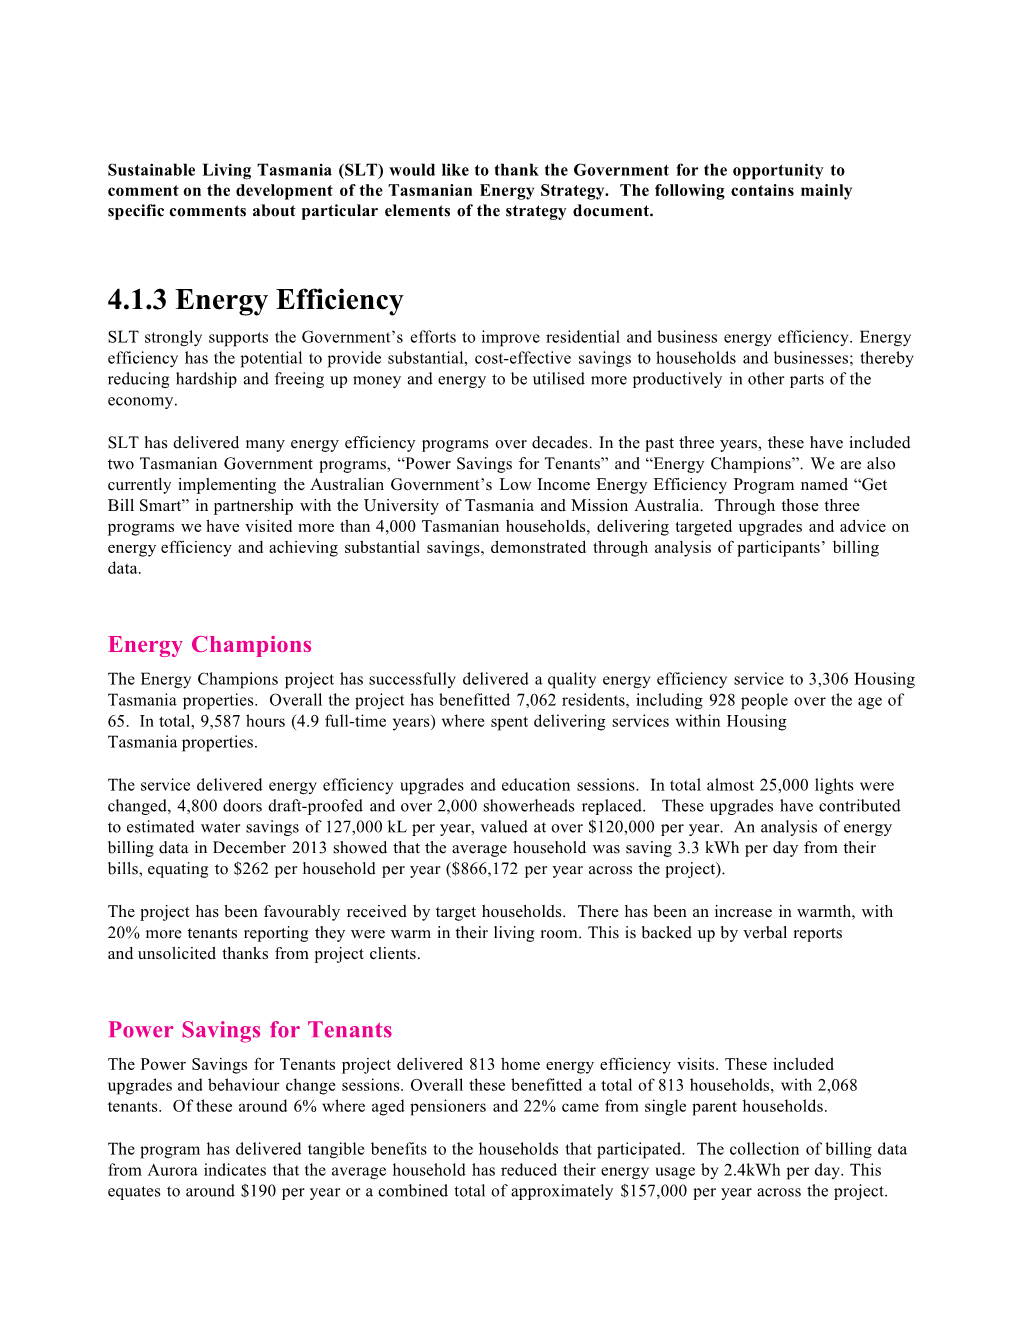 Draft Energy Strategy SLT Submission